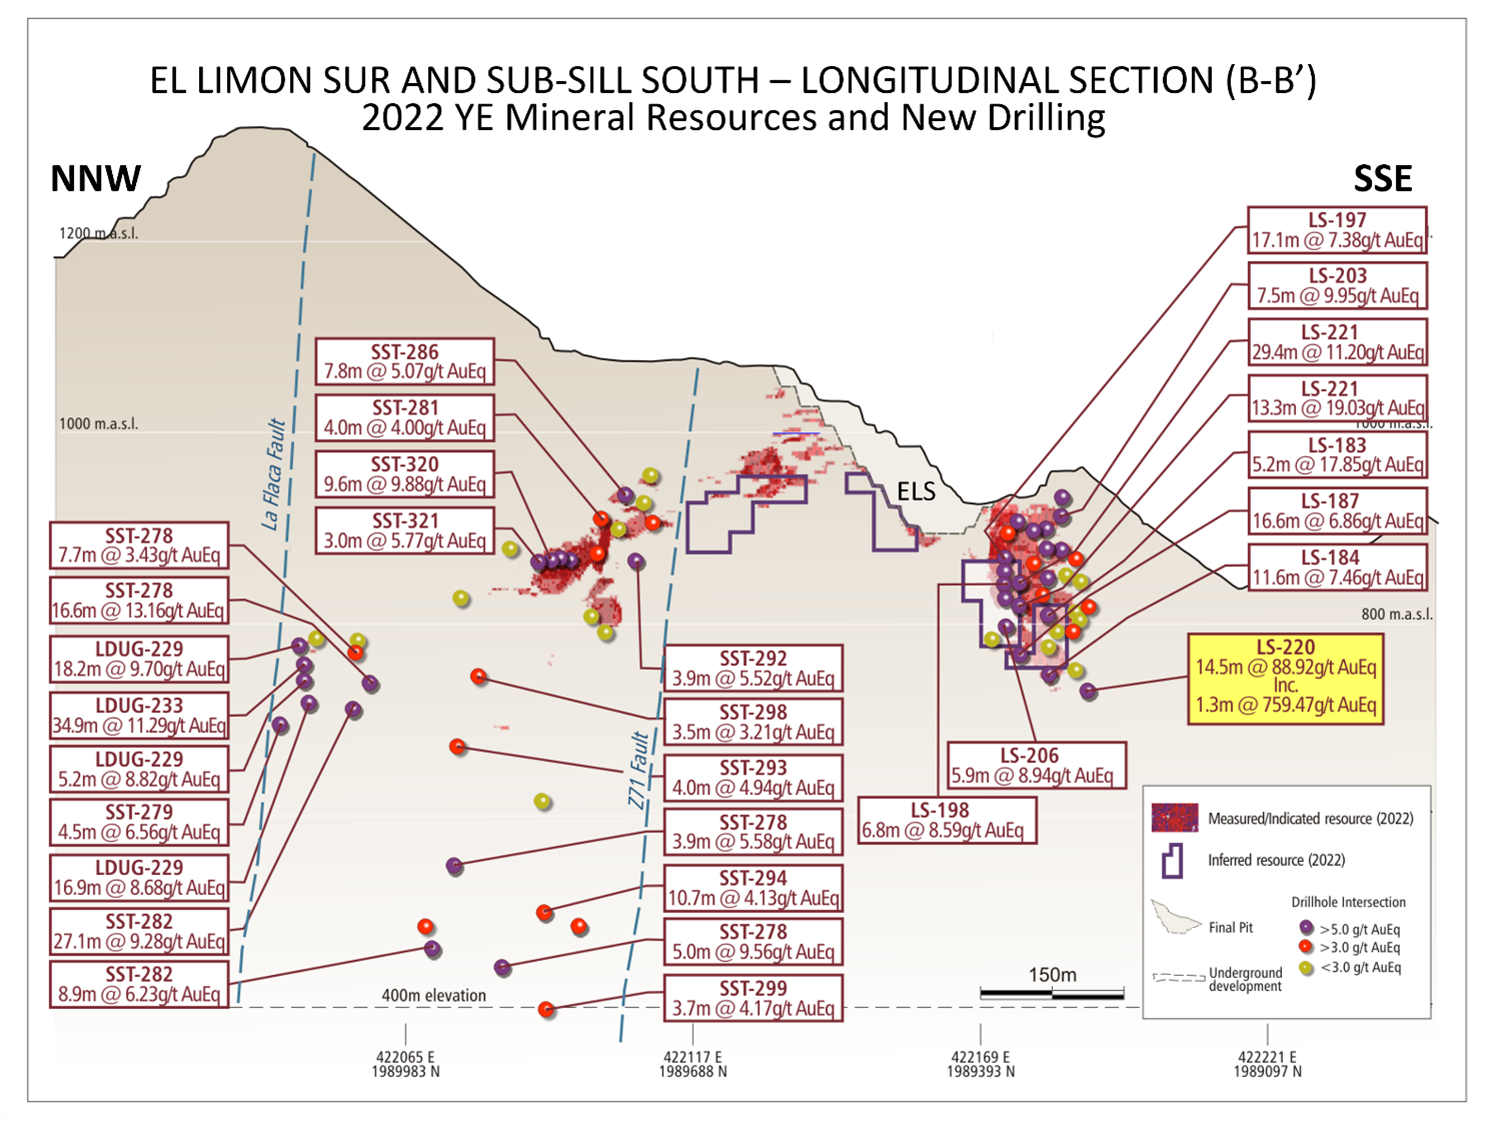 Drilling along the El Limón Sur Trend highlights the potential for resource expansion at both the Sub-Sill South and El Limón Sur Deep deposits